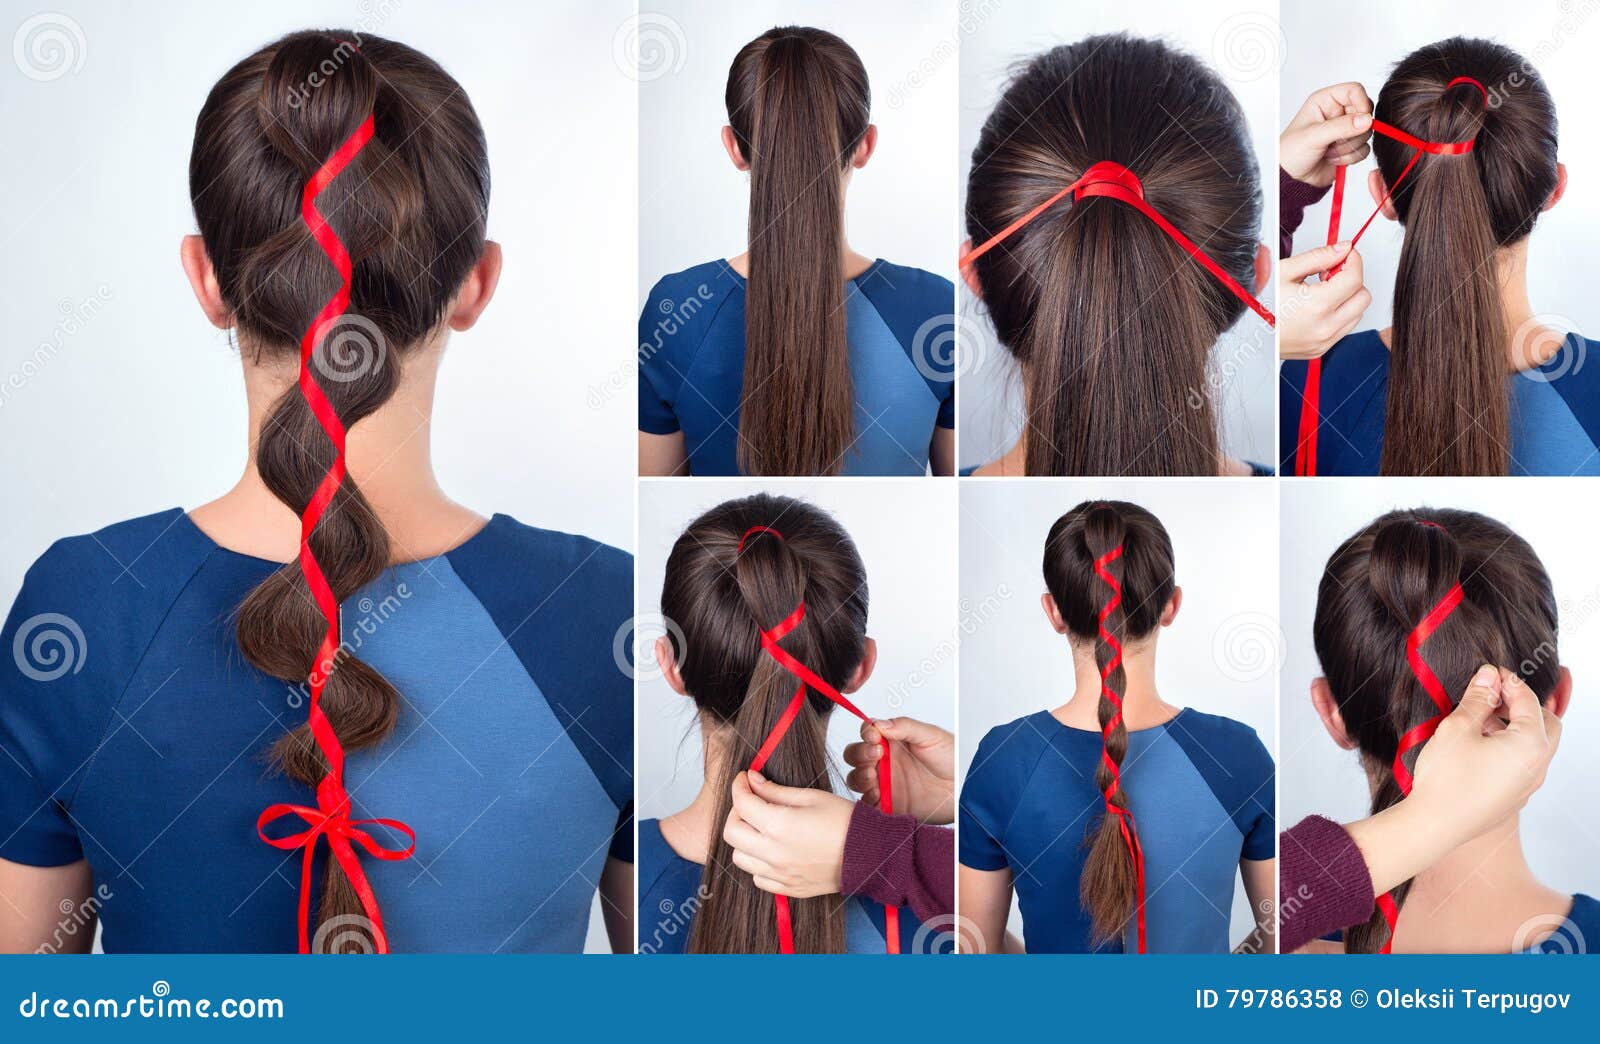 Simple hairstyle tutorial stock photo. Image of model - 79786358